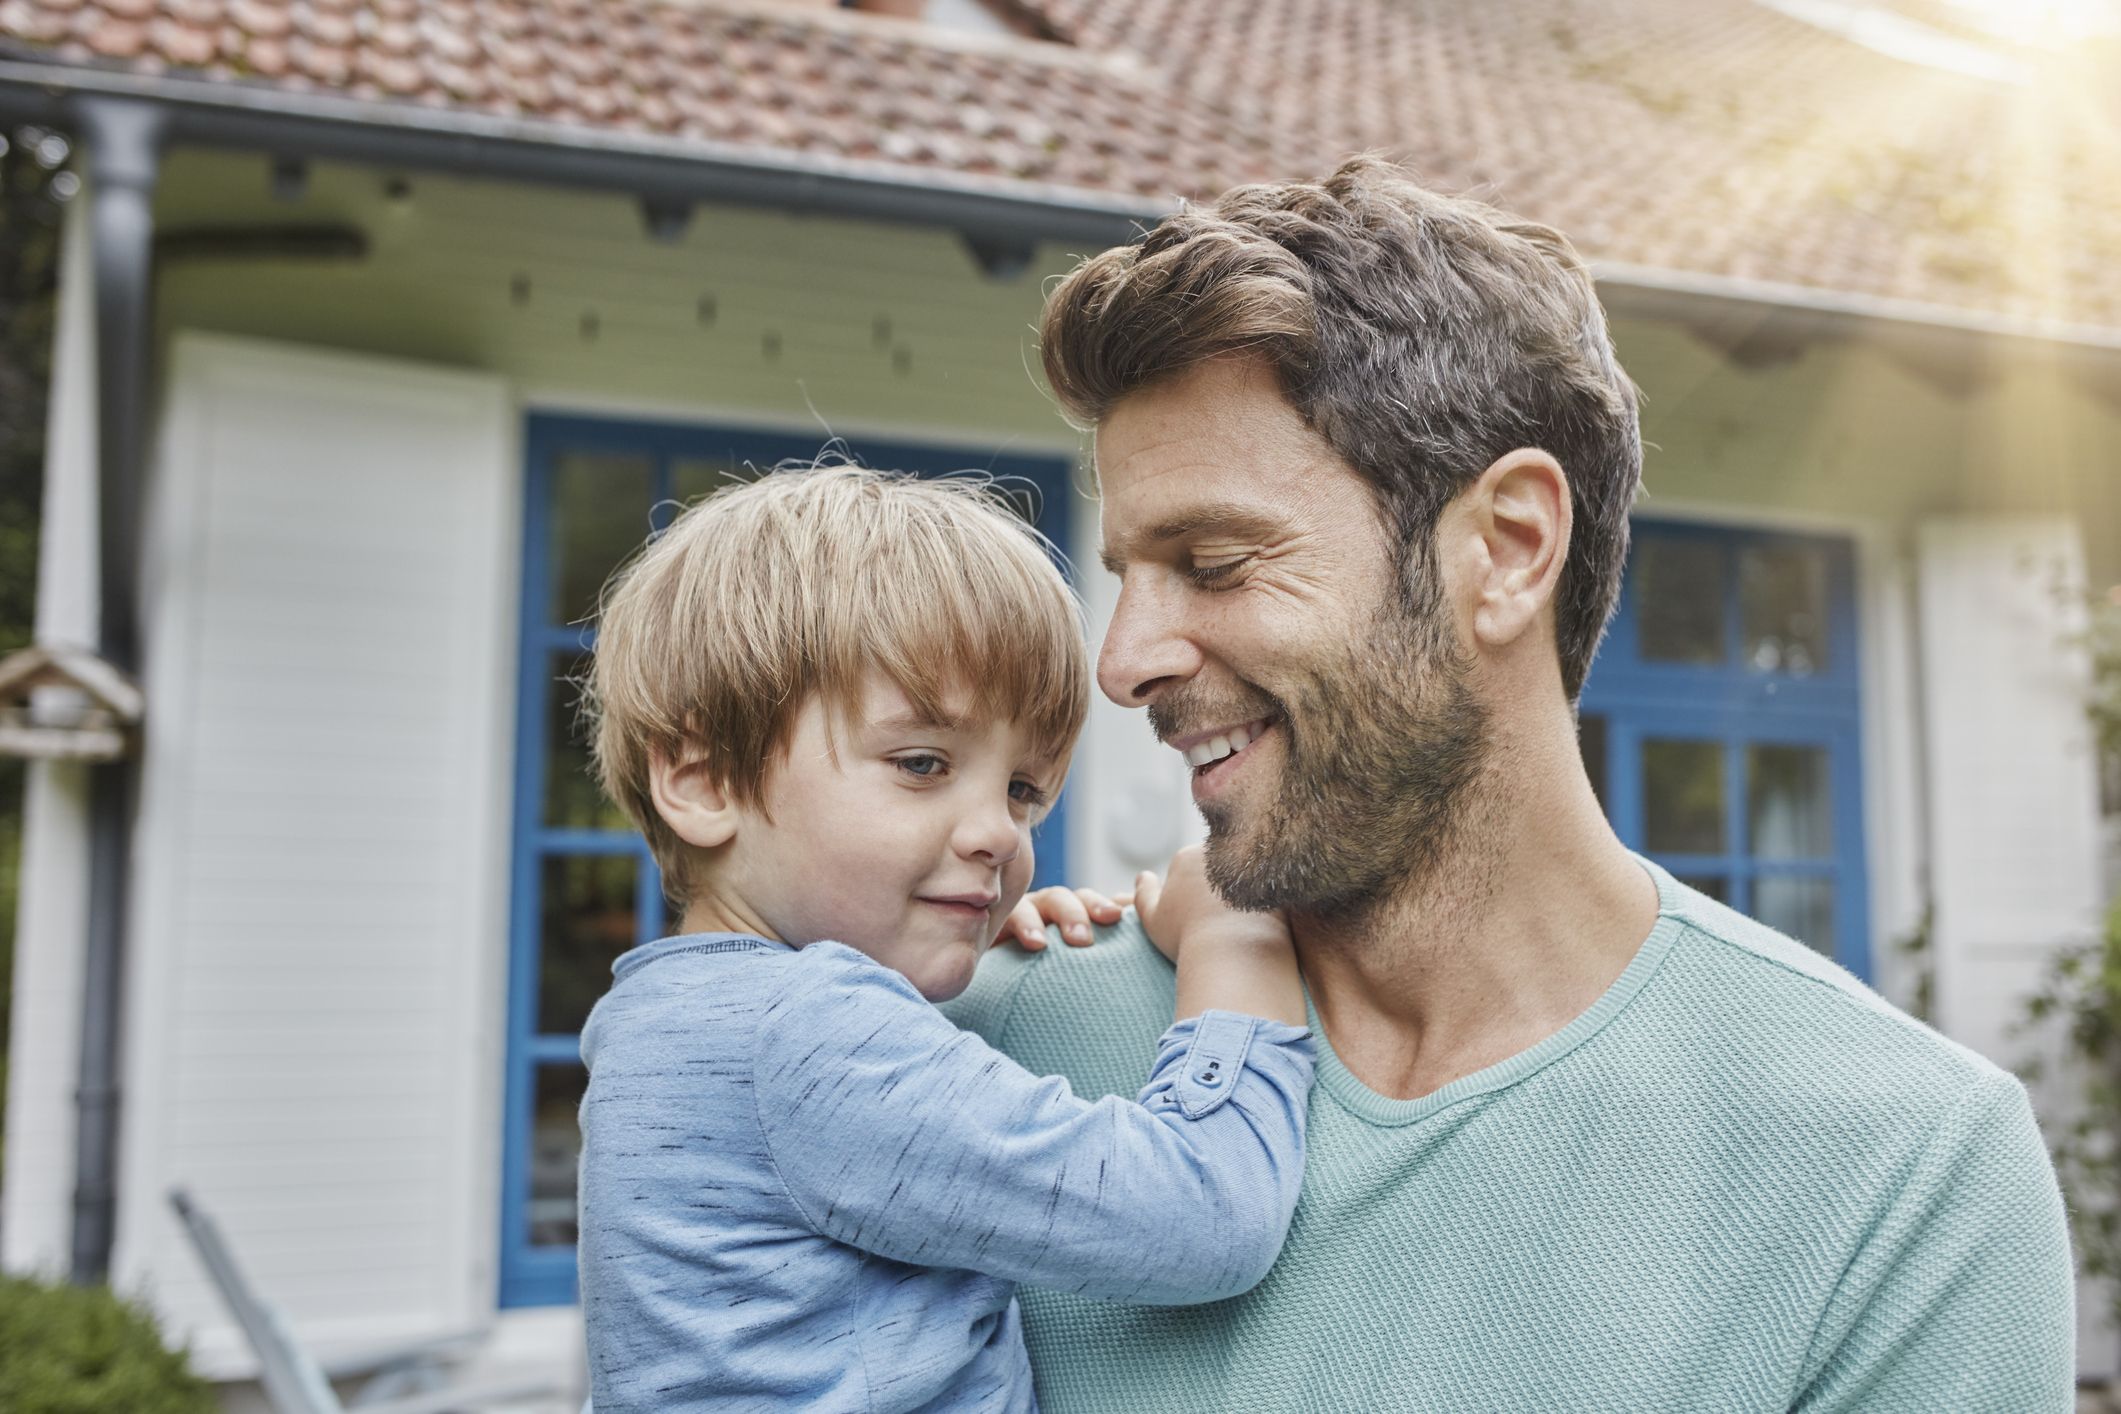 Two Men Identical Poses Father Son Stock Photo 1507290212 | Shutterstock